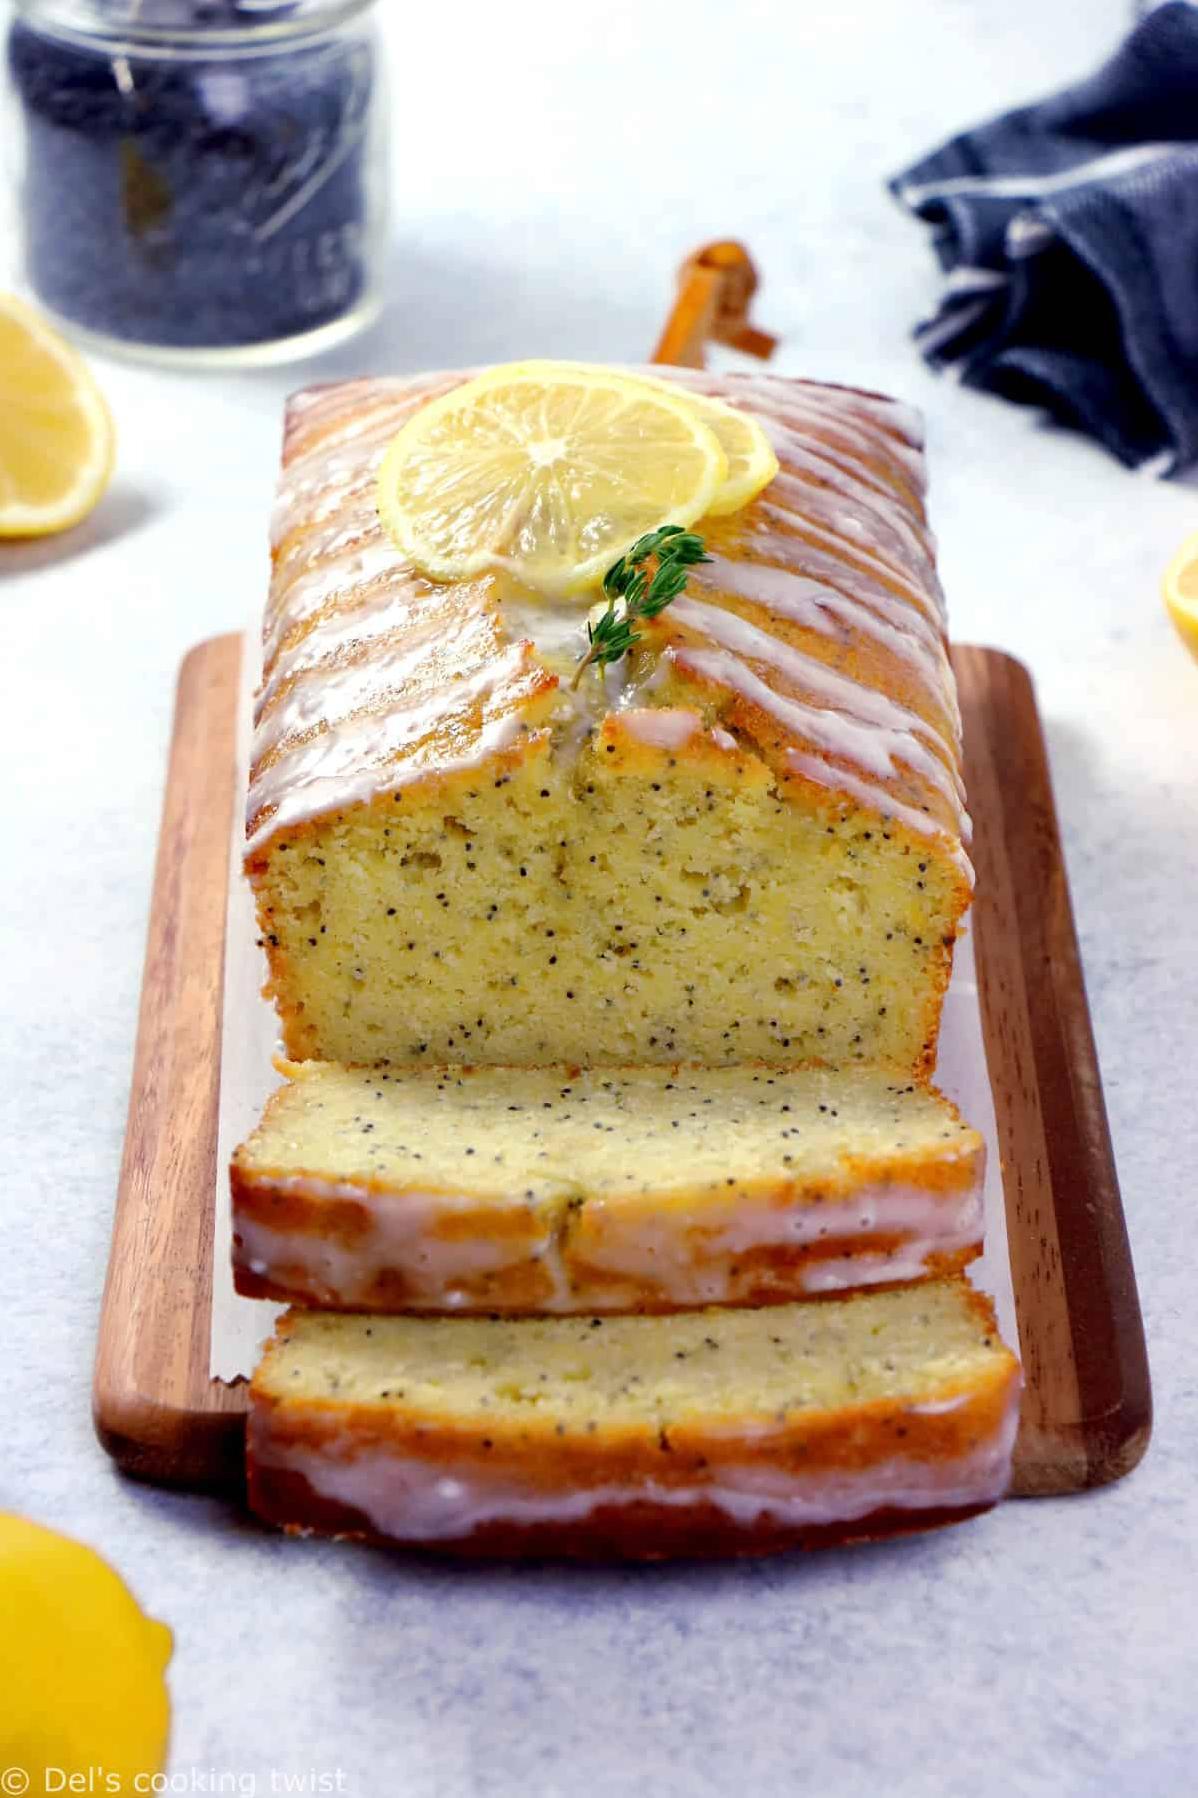  This cake is like sunshine on a plate. The lemon zest and juice give it a bright and tangy flavor that will wake up your taste buds.